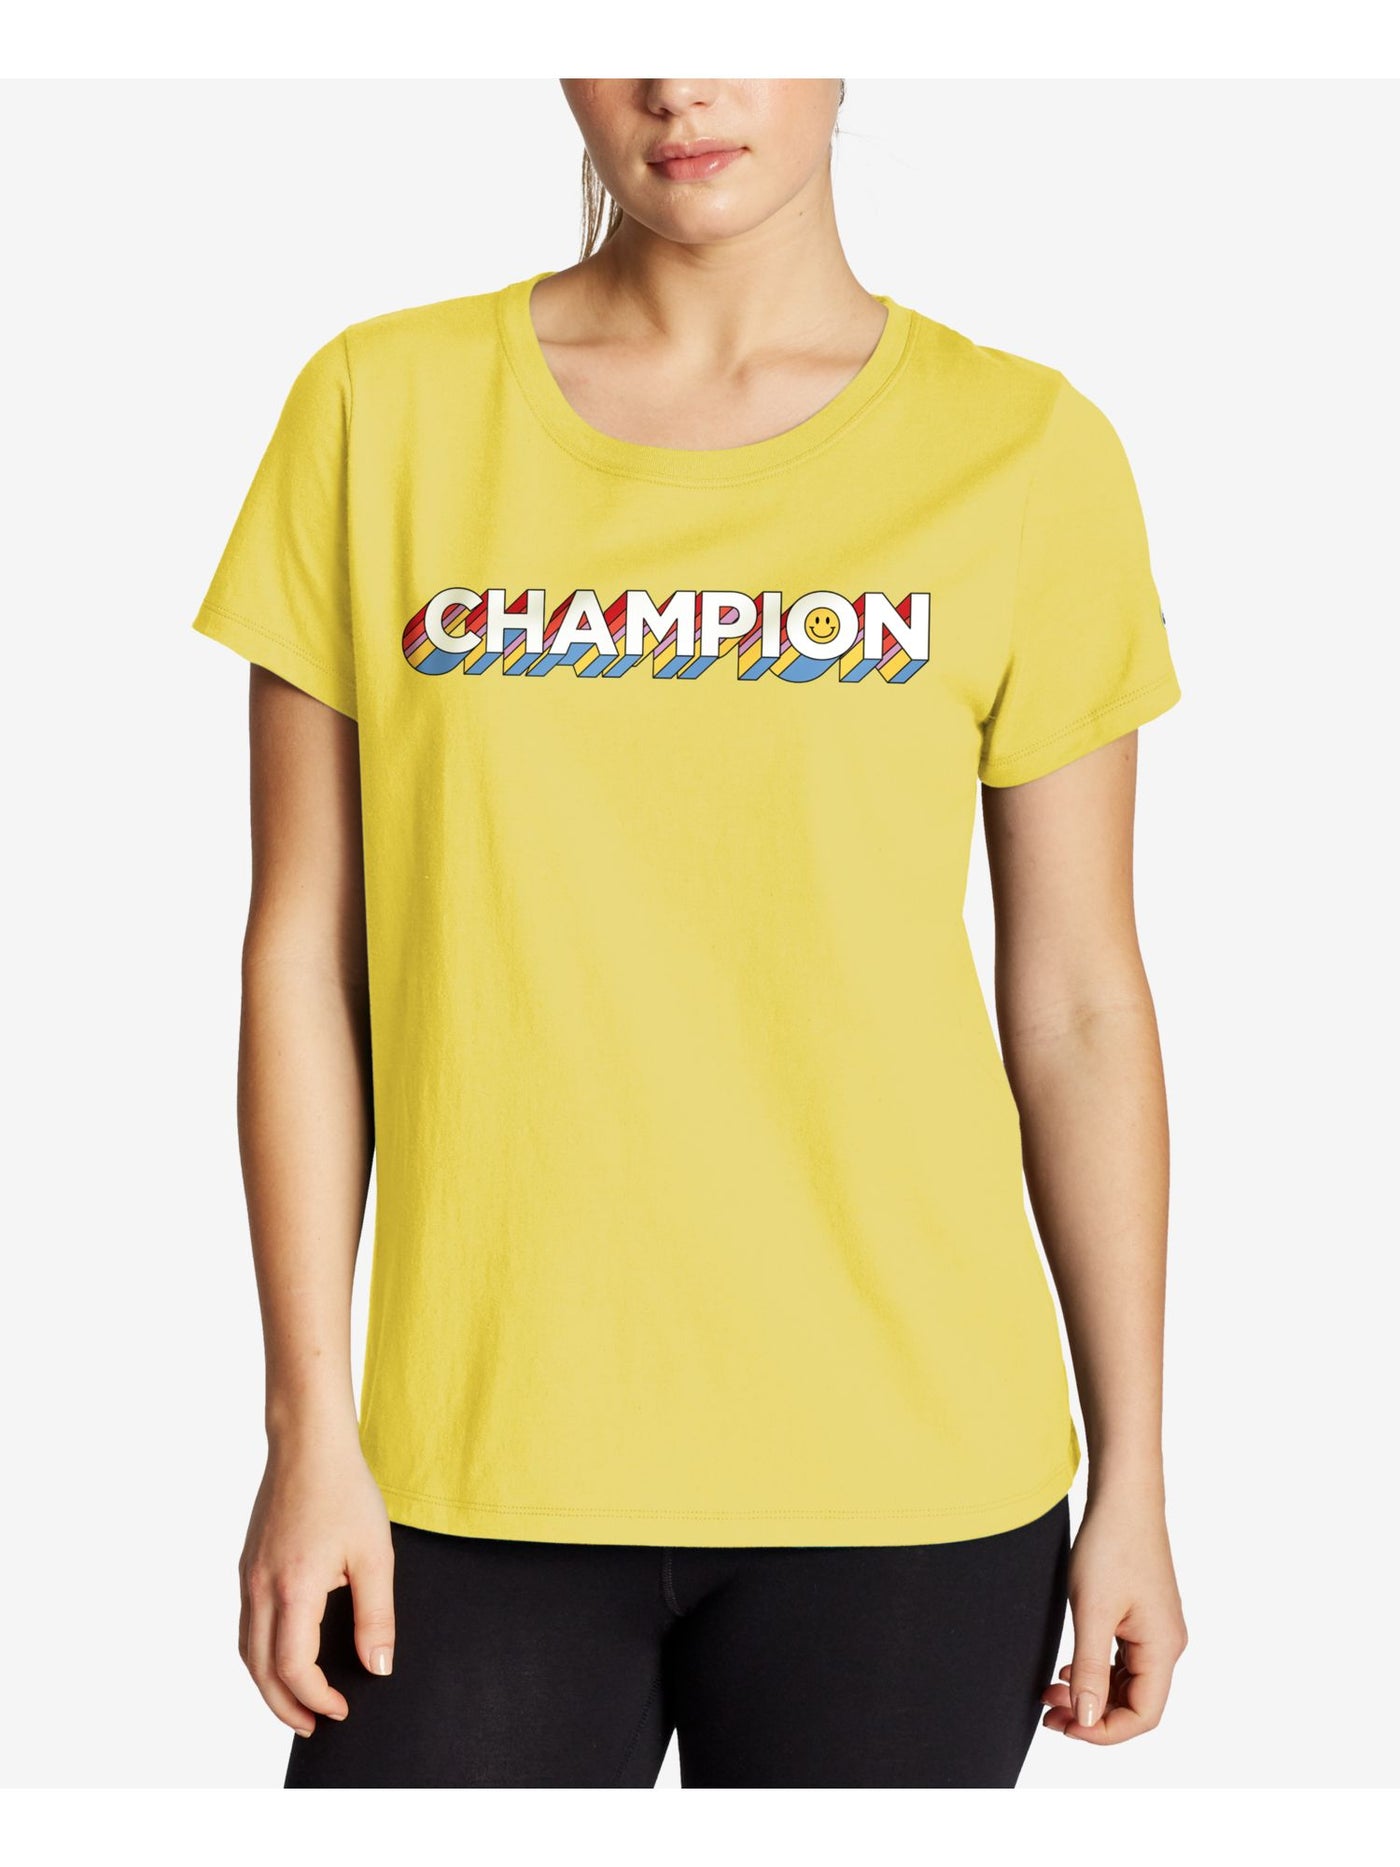 CHAMPION Womens Gold Stretch Ribbed Logo Graphic Short Sleeve Crew Neck T-Shirt S